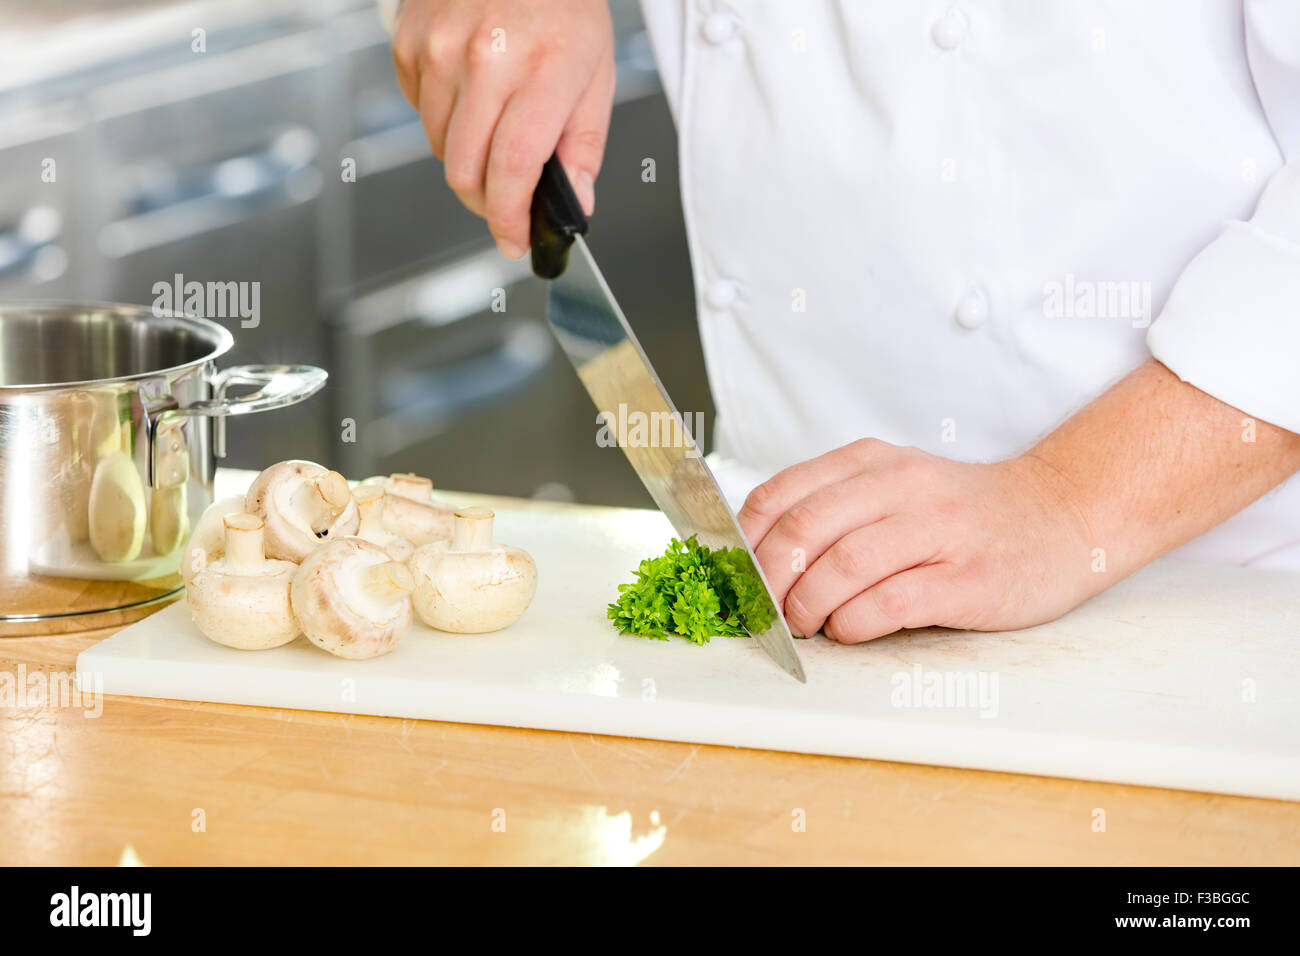 Professional chef cutting parley and mushrooms Stock Photo